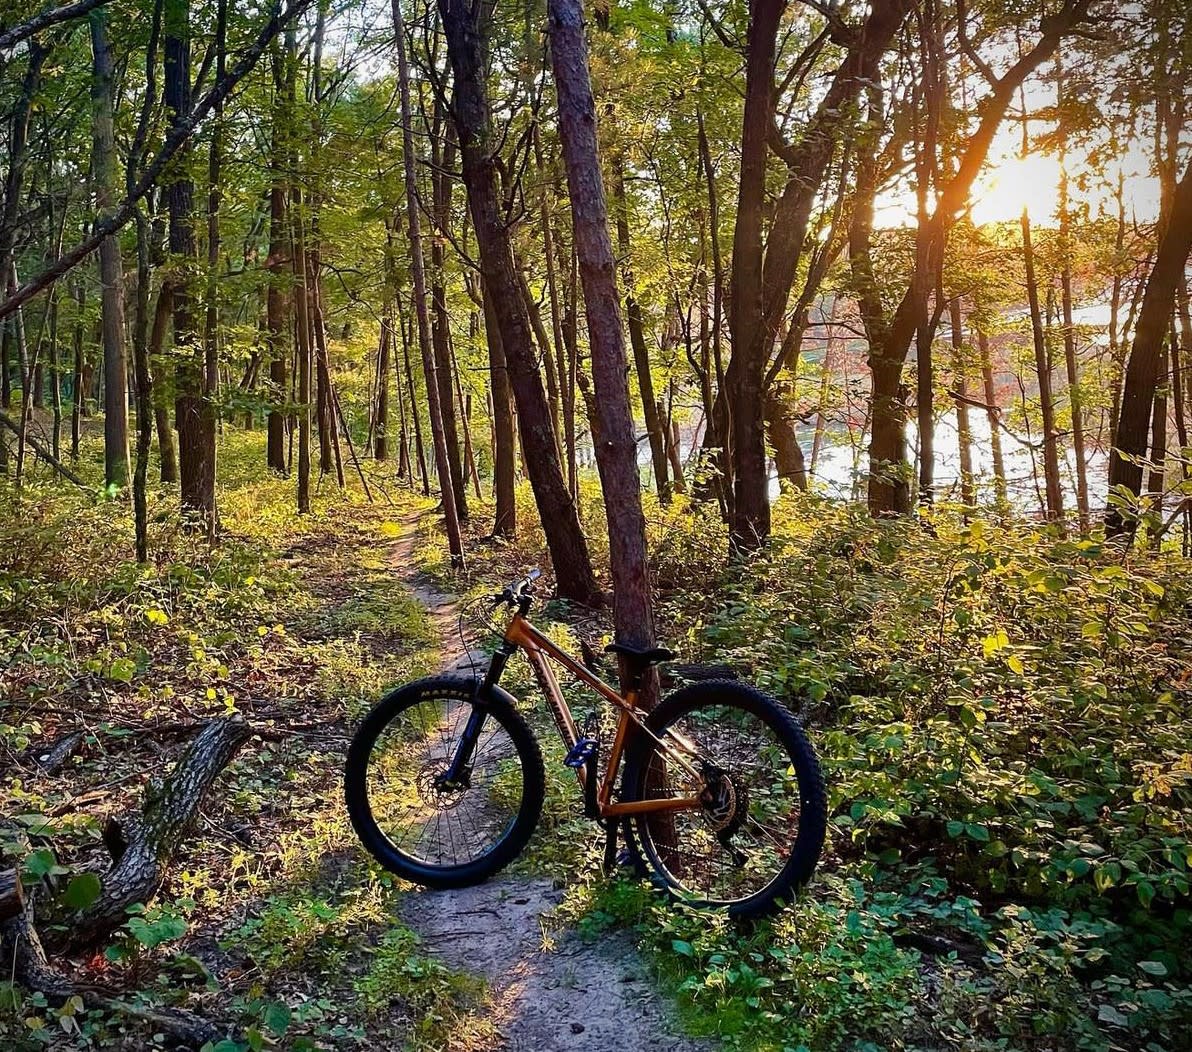 Bike resting against a tree with a sunset in the background peeking through the trees.